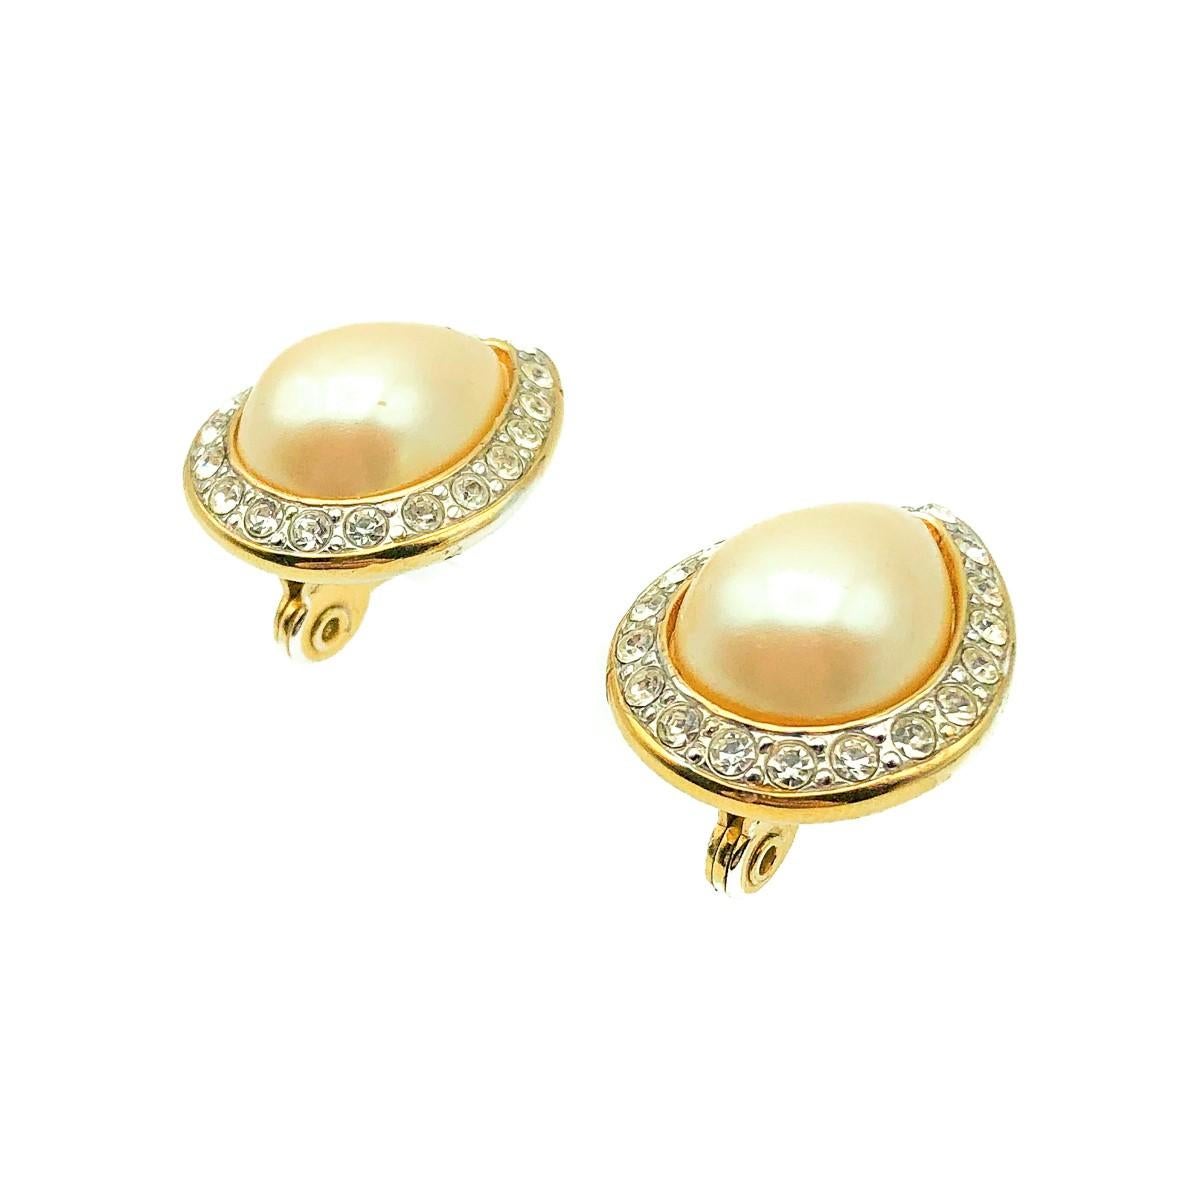 A Vintage Monet Pearl Teardrop Earring. Crafted in gold plated metal set with a glass teardrop faux pearl and crystals. Very good vintage condition, 2.2cms, signed.

Established in 2016, this is a British brand that is already making a name for